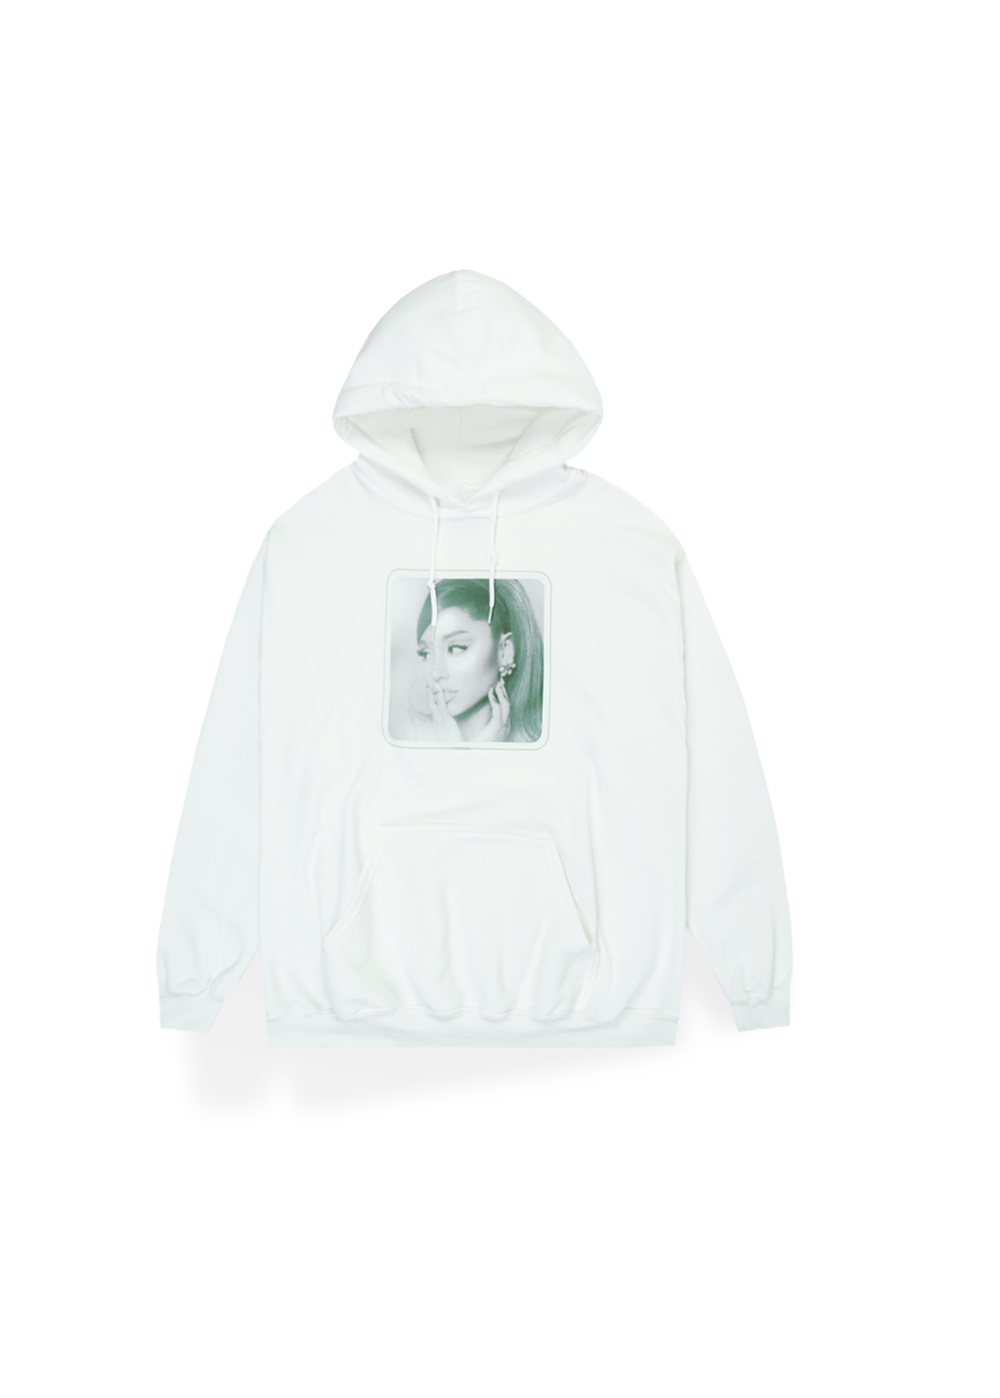 POSITIONS COVER HOODIE – Ariana Grande Official Store